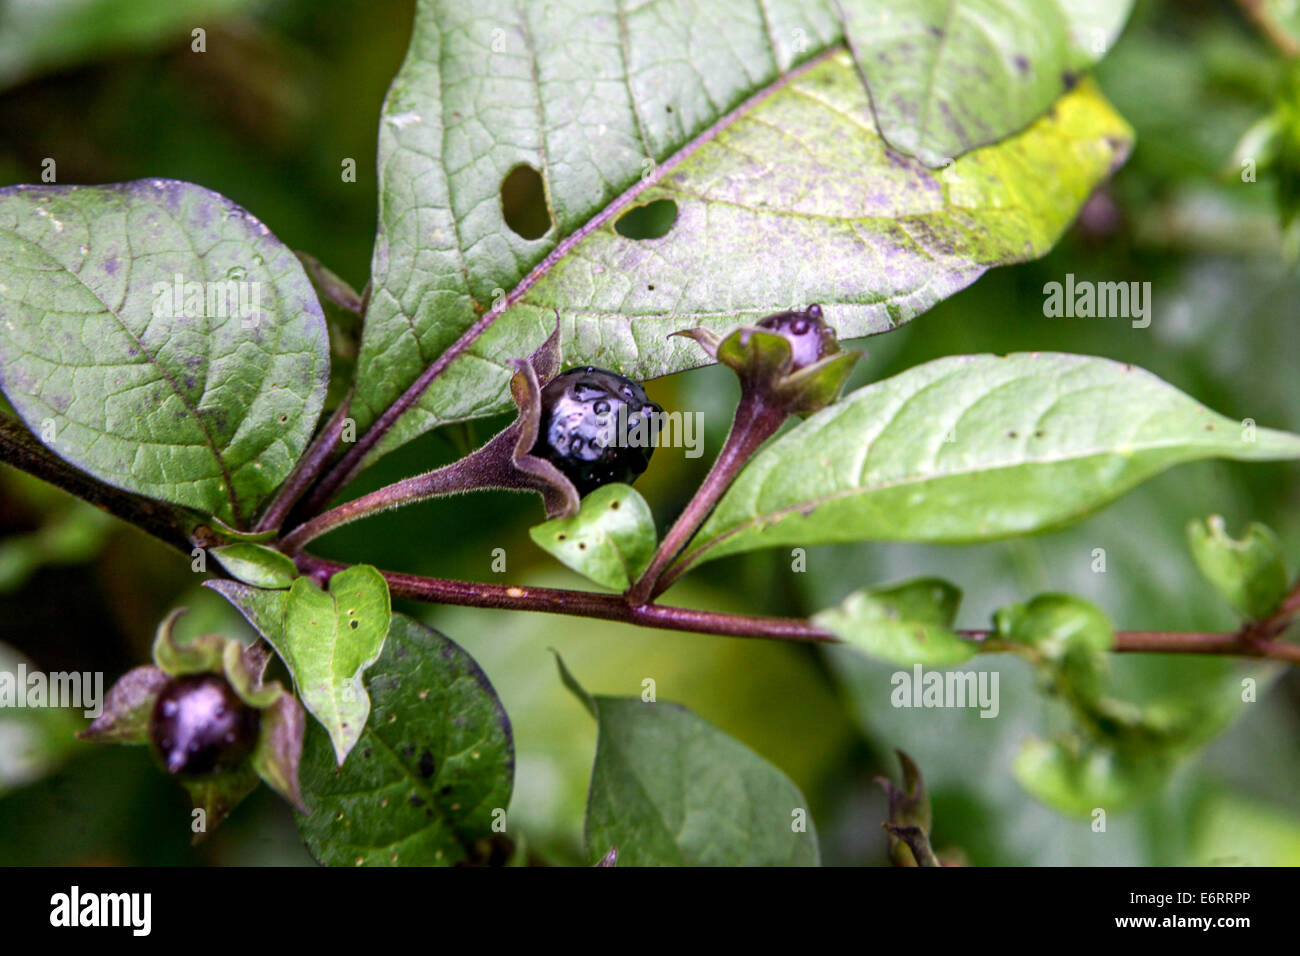 Atropa belladonna, deadly nightshade, poisonous ripened fruits, summer, dangerous plants Stock Photo